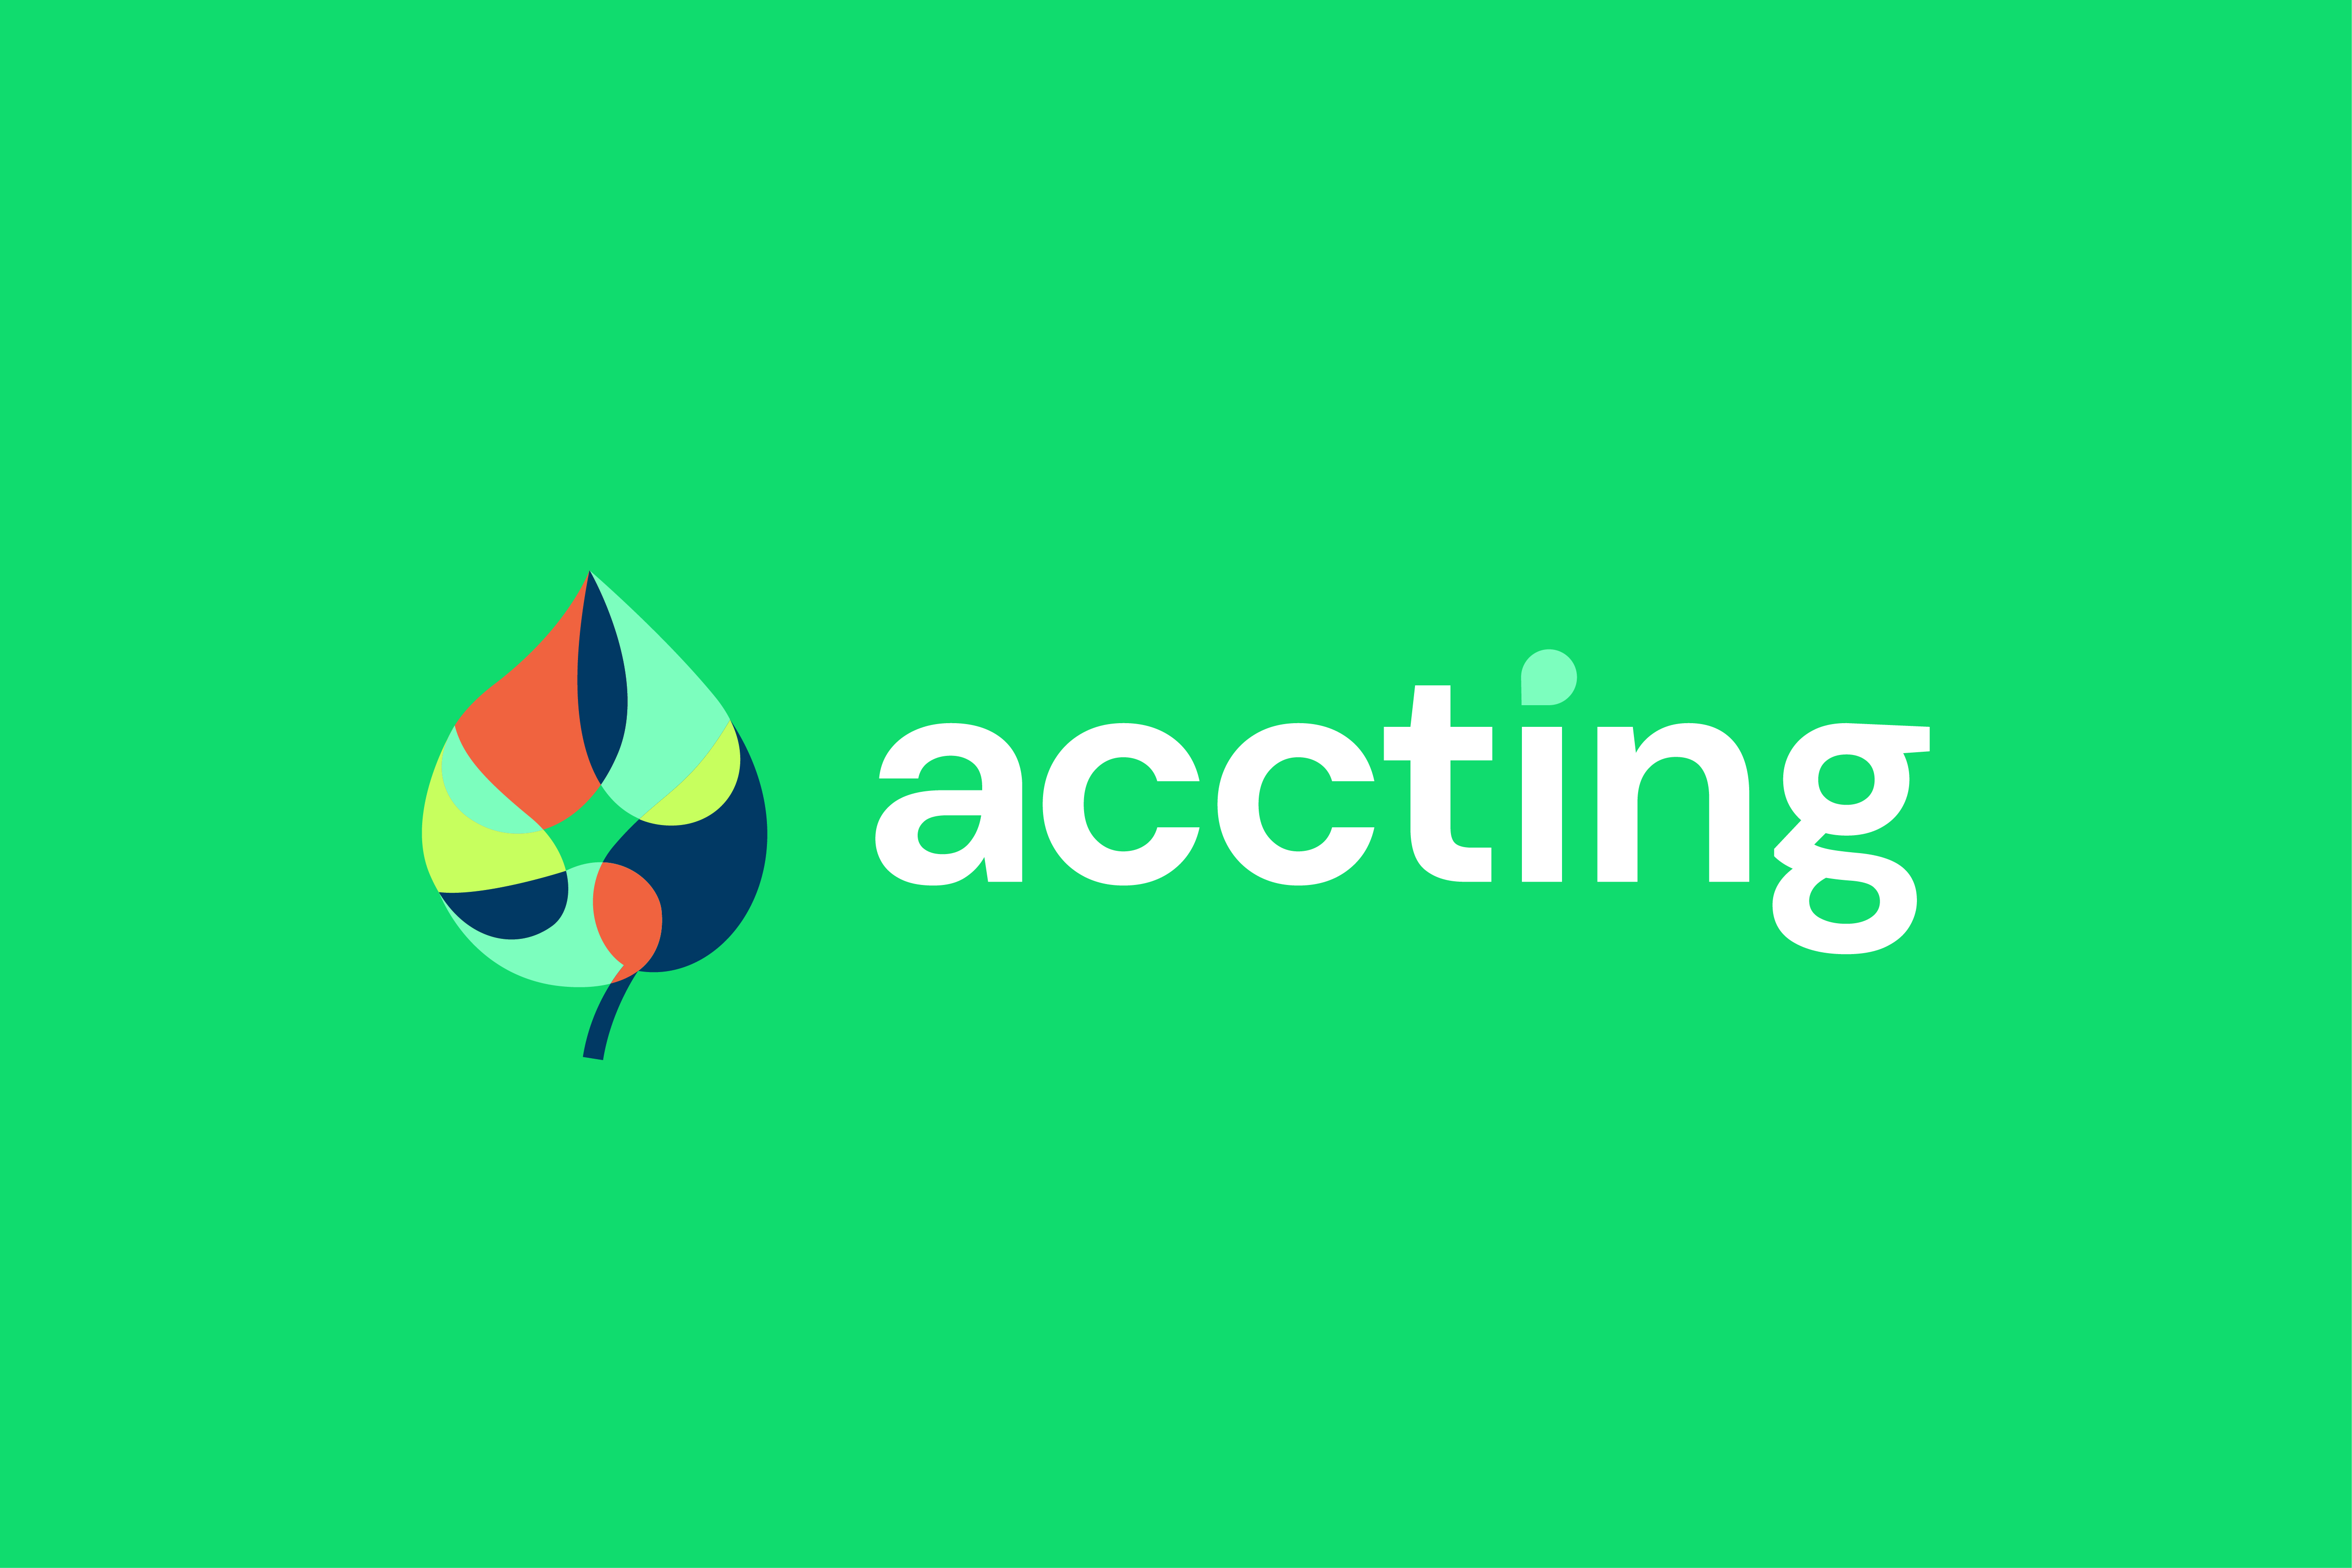 ACCTING project Newsletter #2